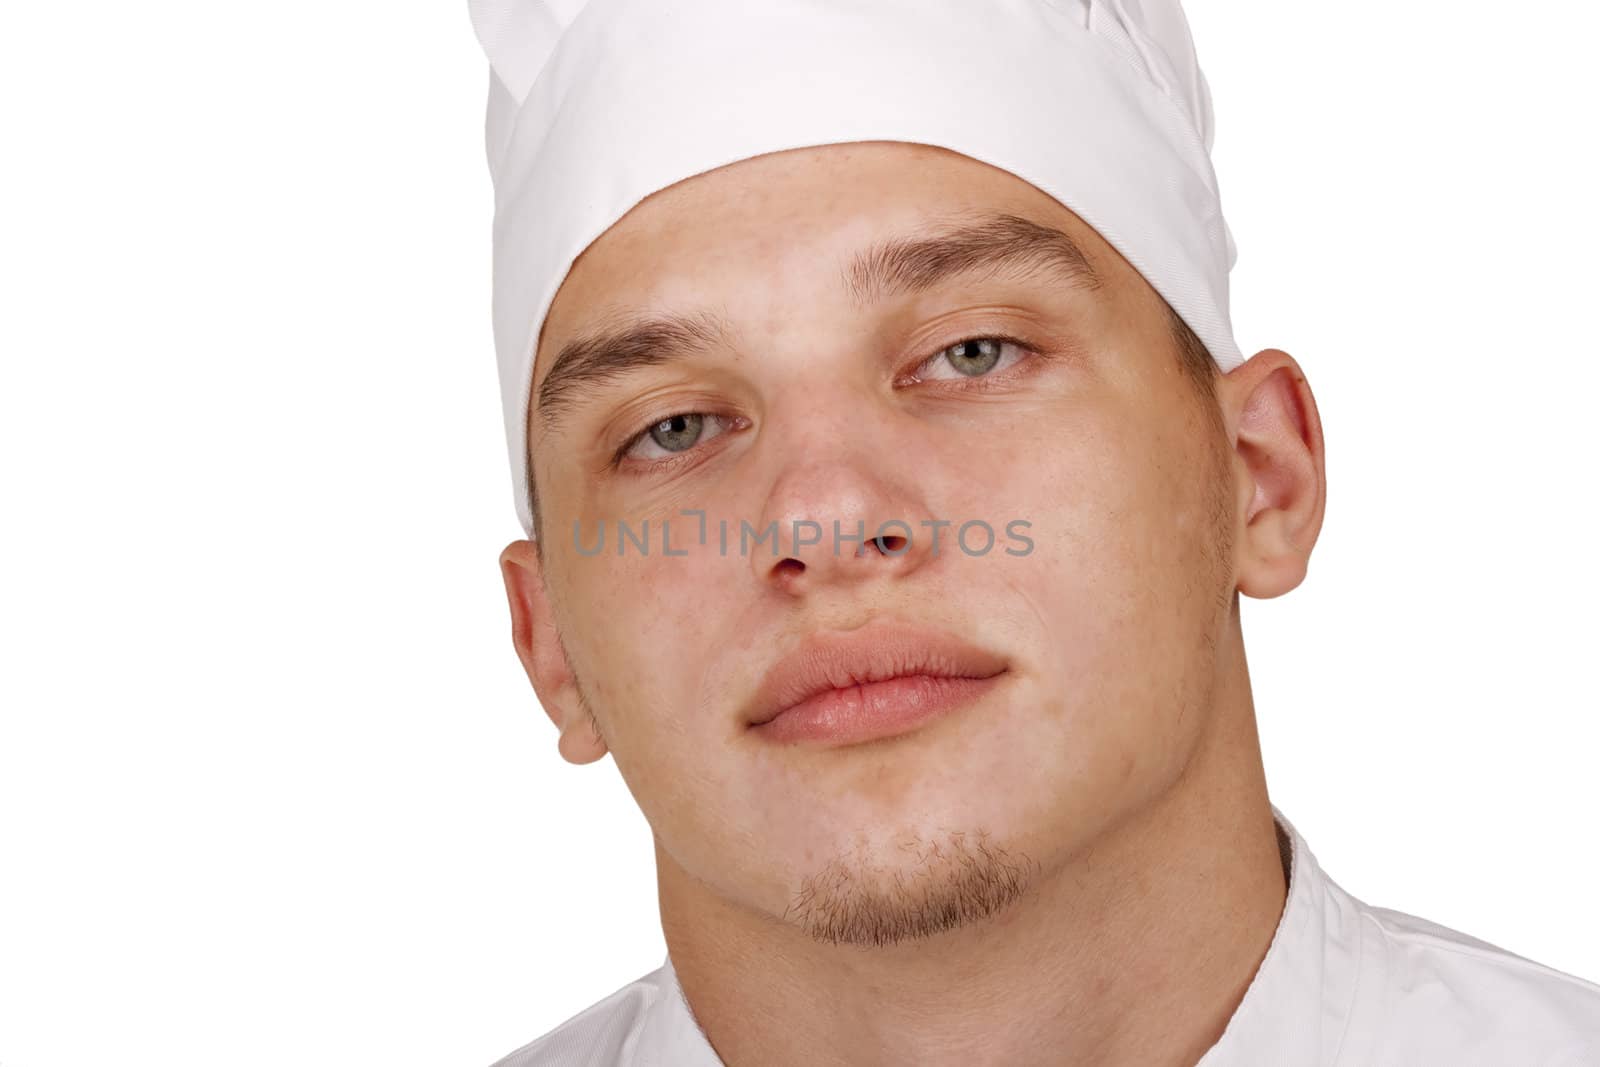 Face of the young cooks in chef's hat.